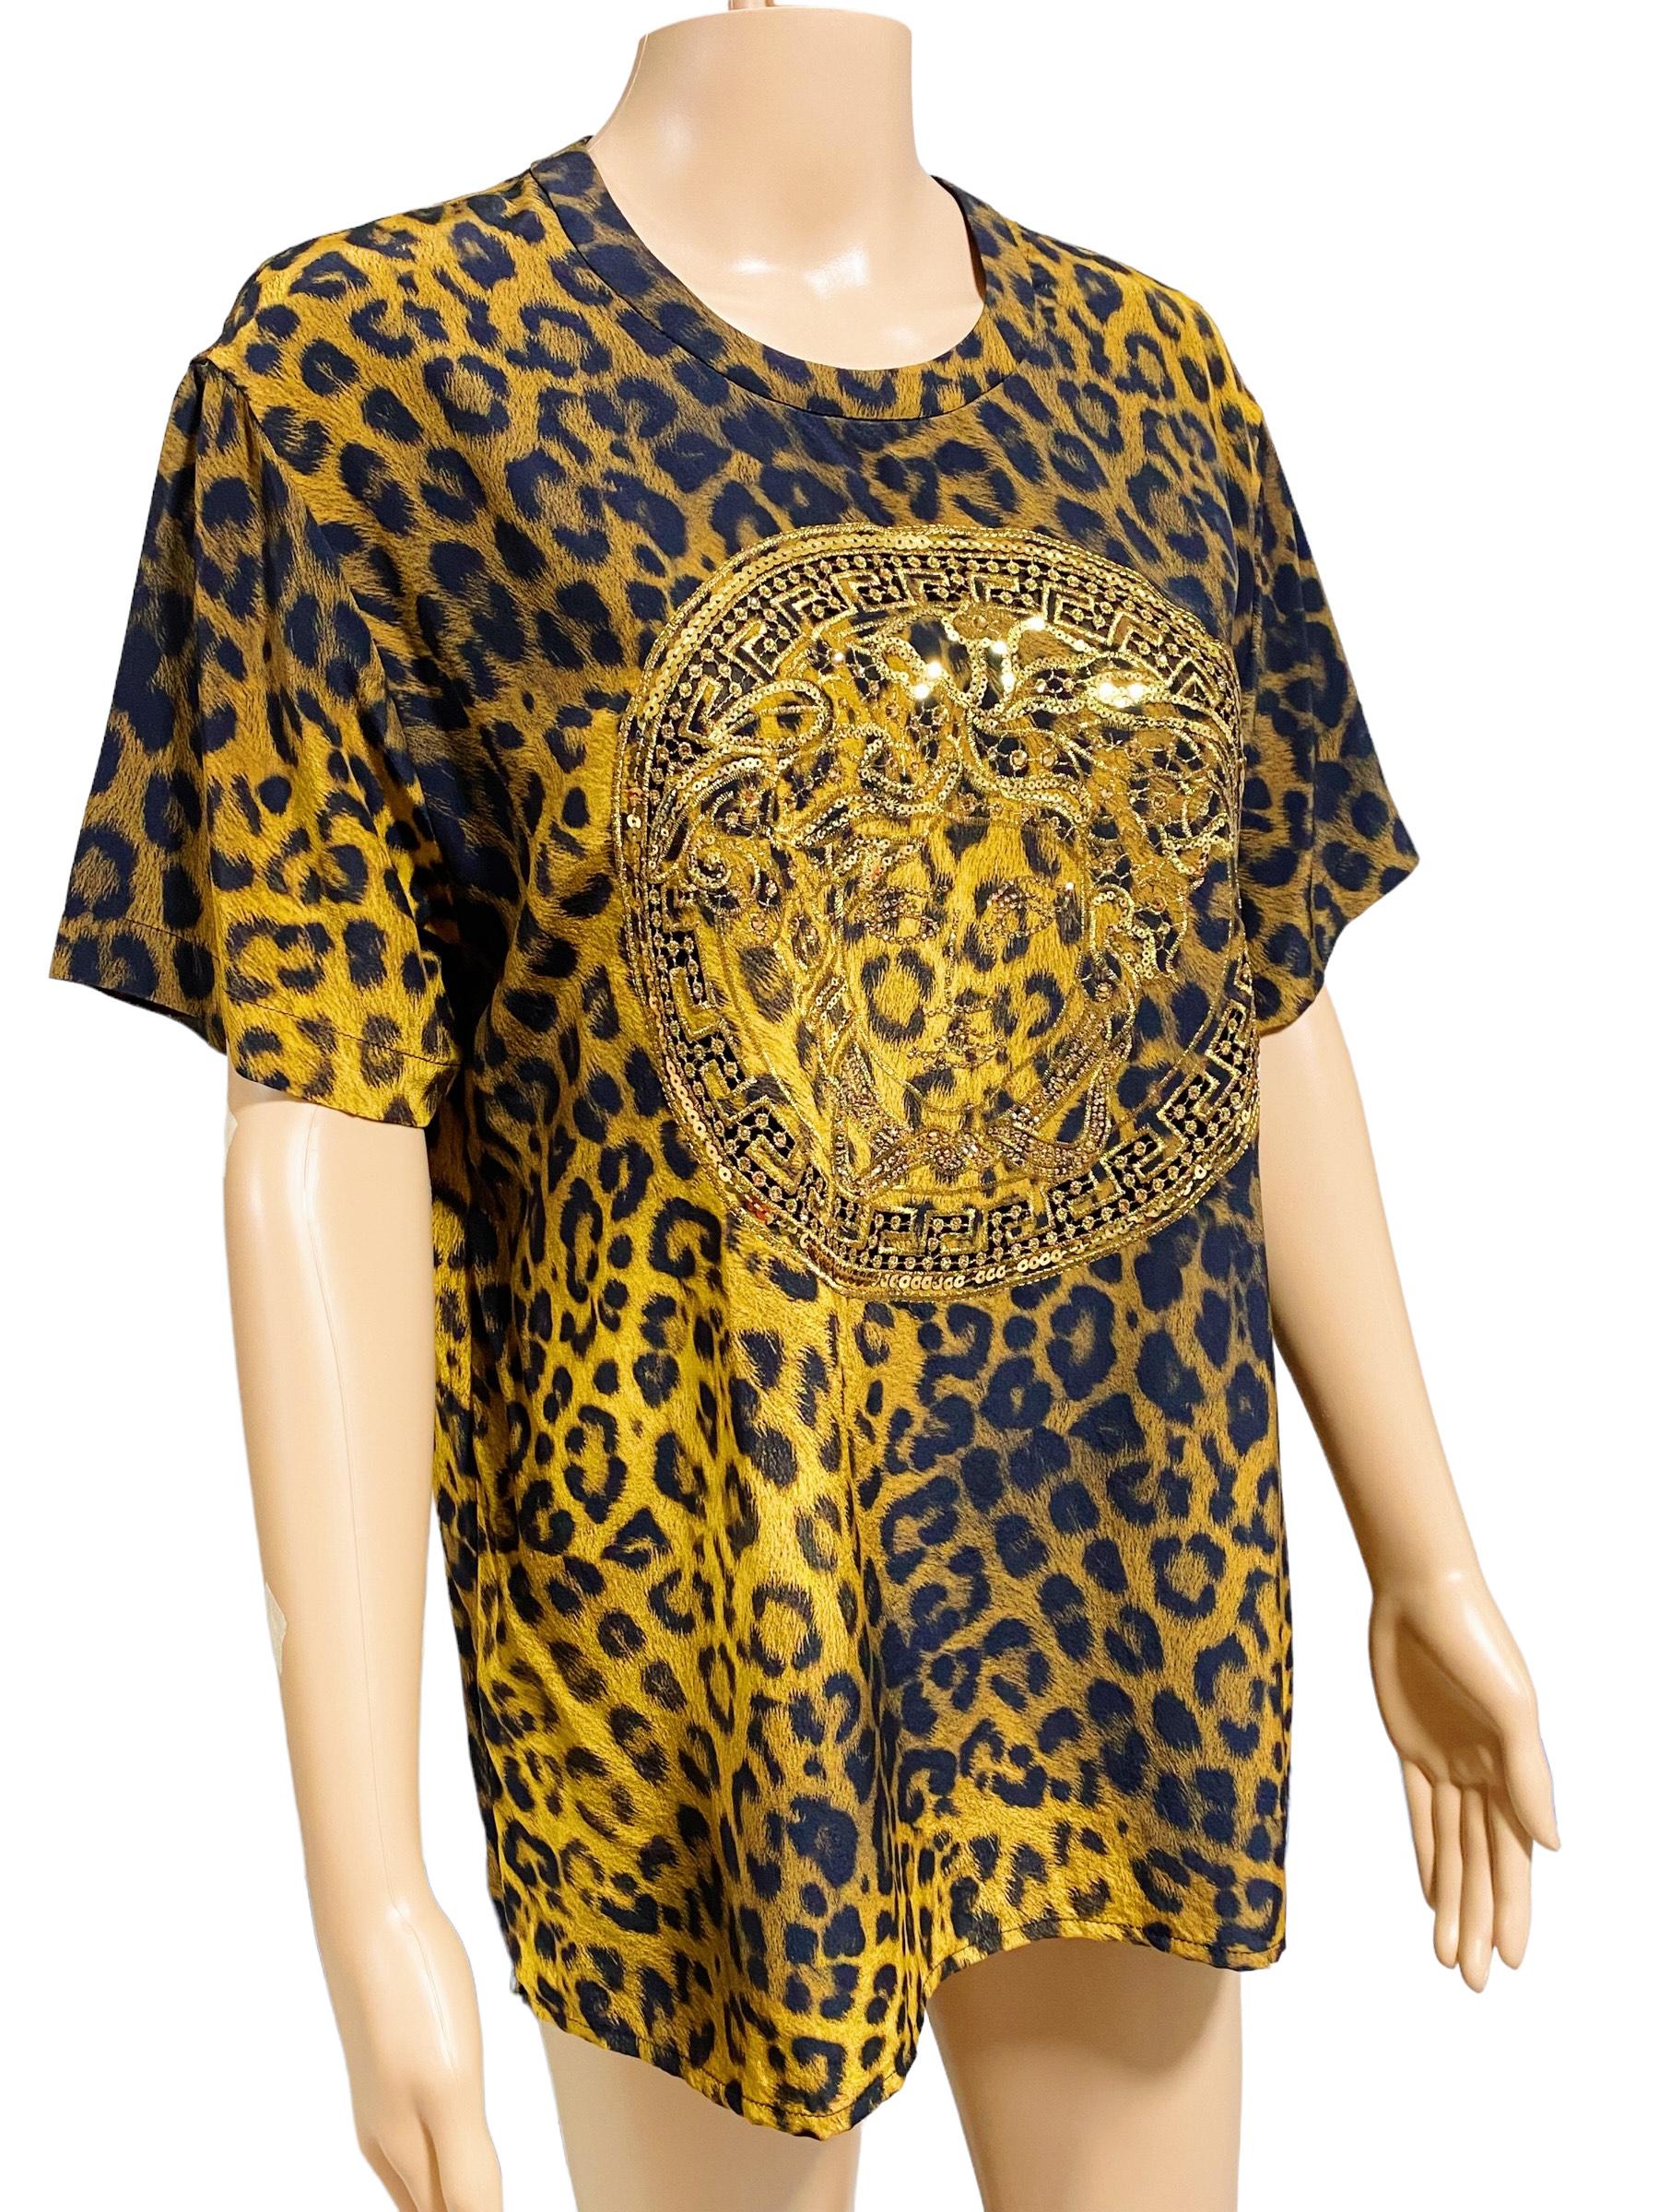 Rare and Vintage Versace - Animal Print Embellished Medusa logo Silk Shirt In Excellent Condition For Sale In Iba, PH